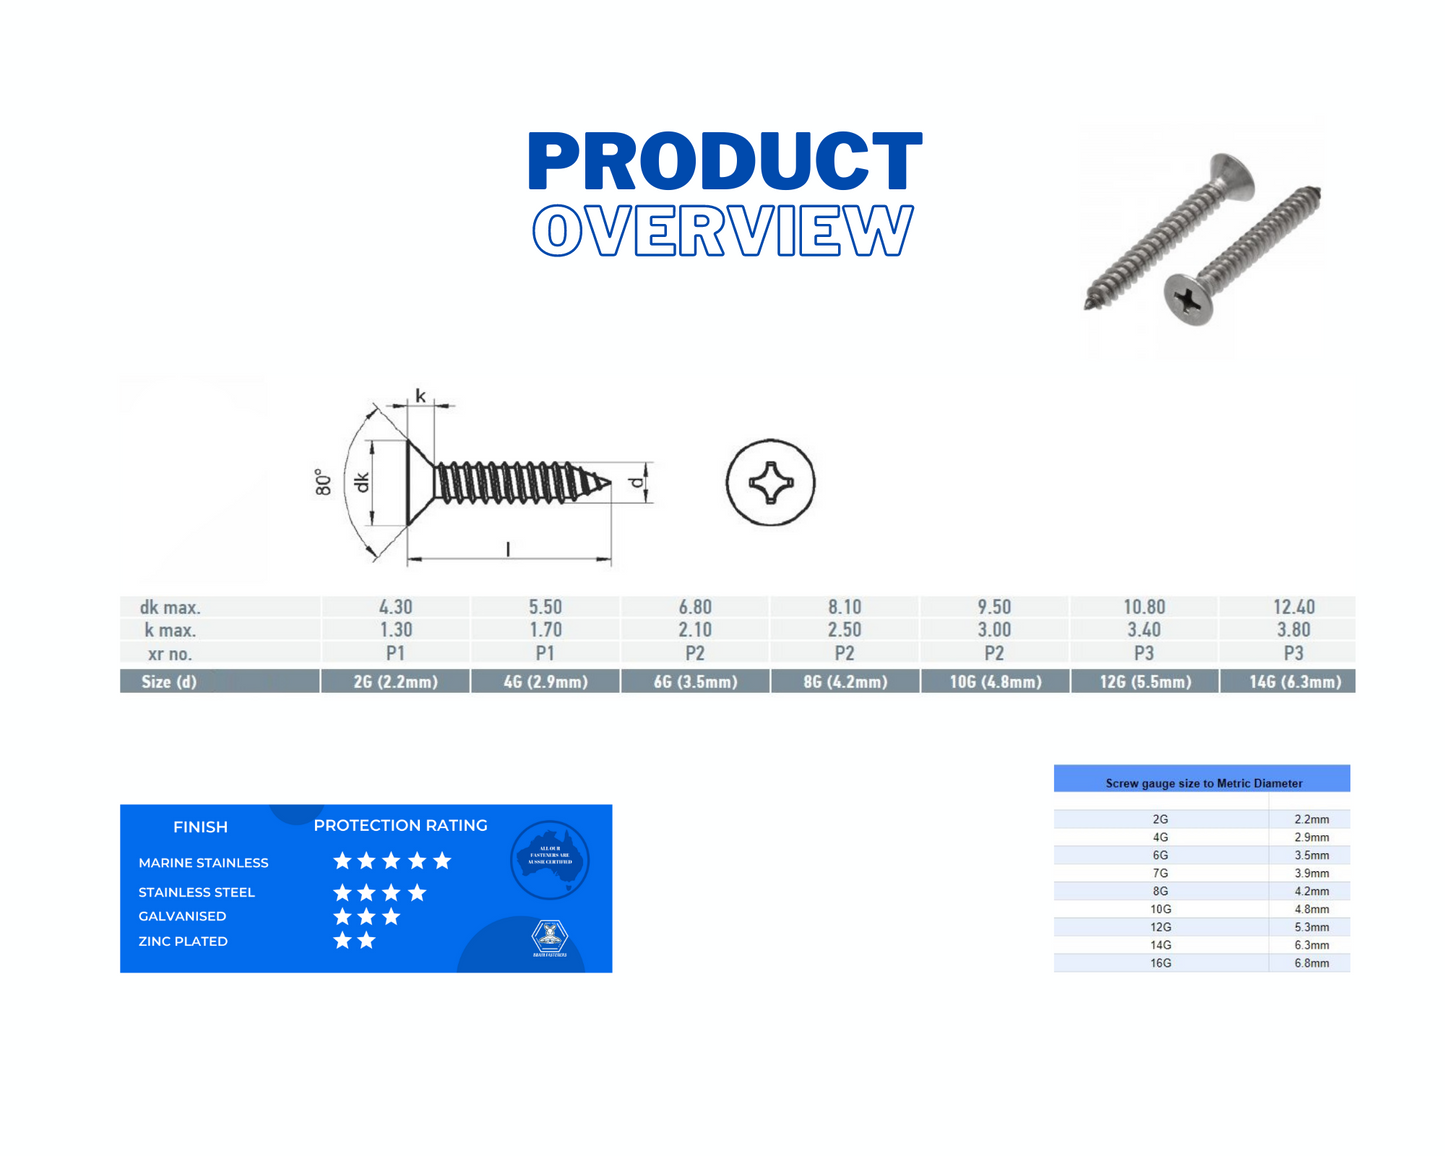 8G x 16mm Countersunk Phillips Self Tapping Screws Stainless Steel